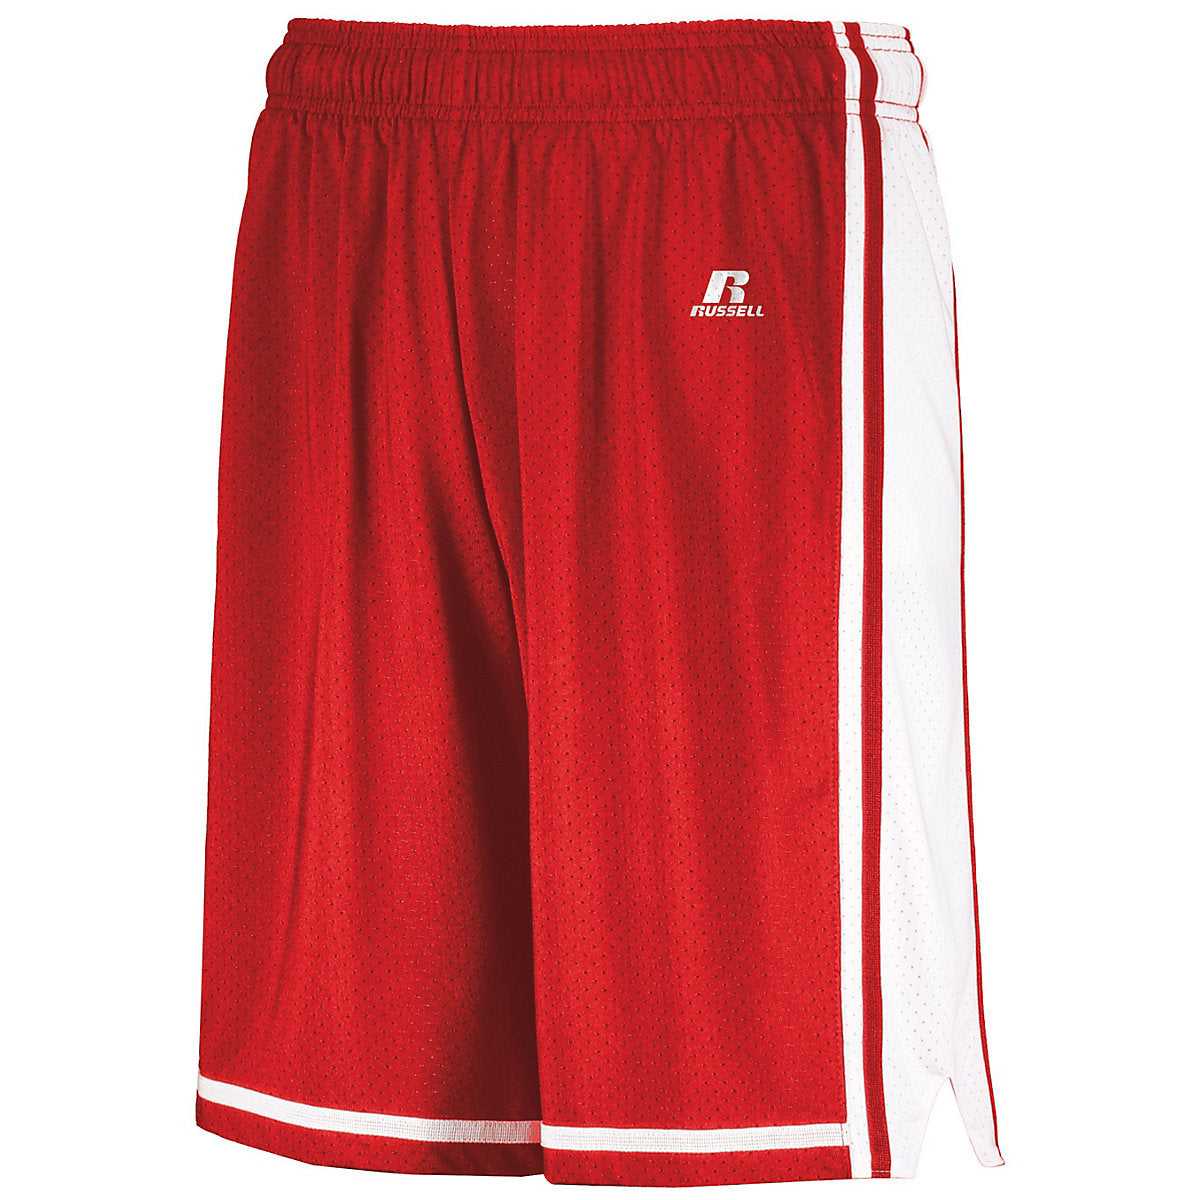 Mens Athletic Mesh Varsity Shorts, TechPackTemplate